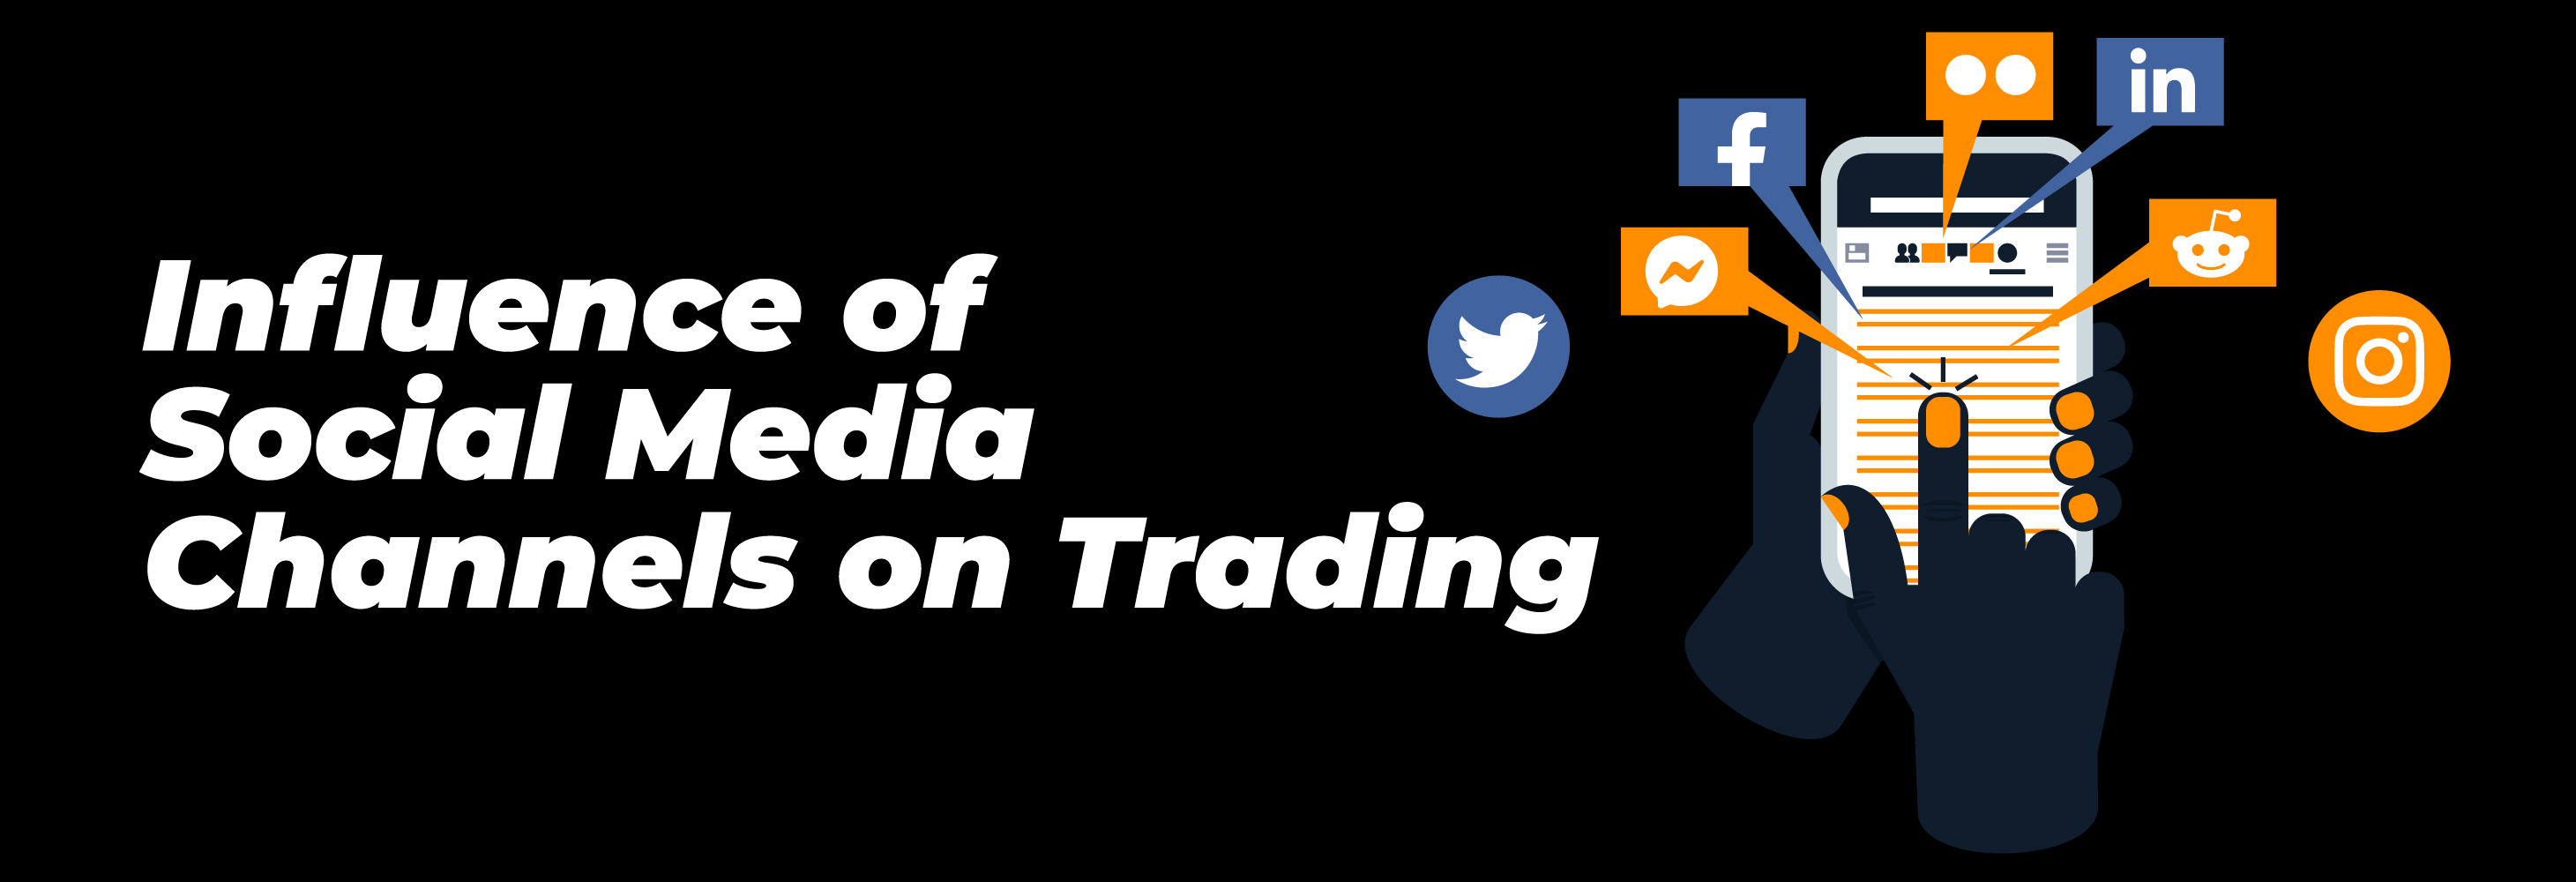  Influence of Social Media Channels on Trading